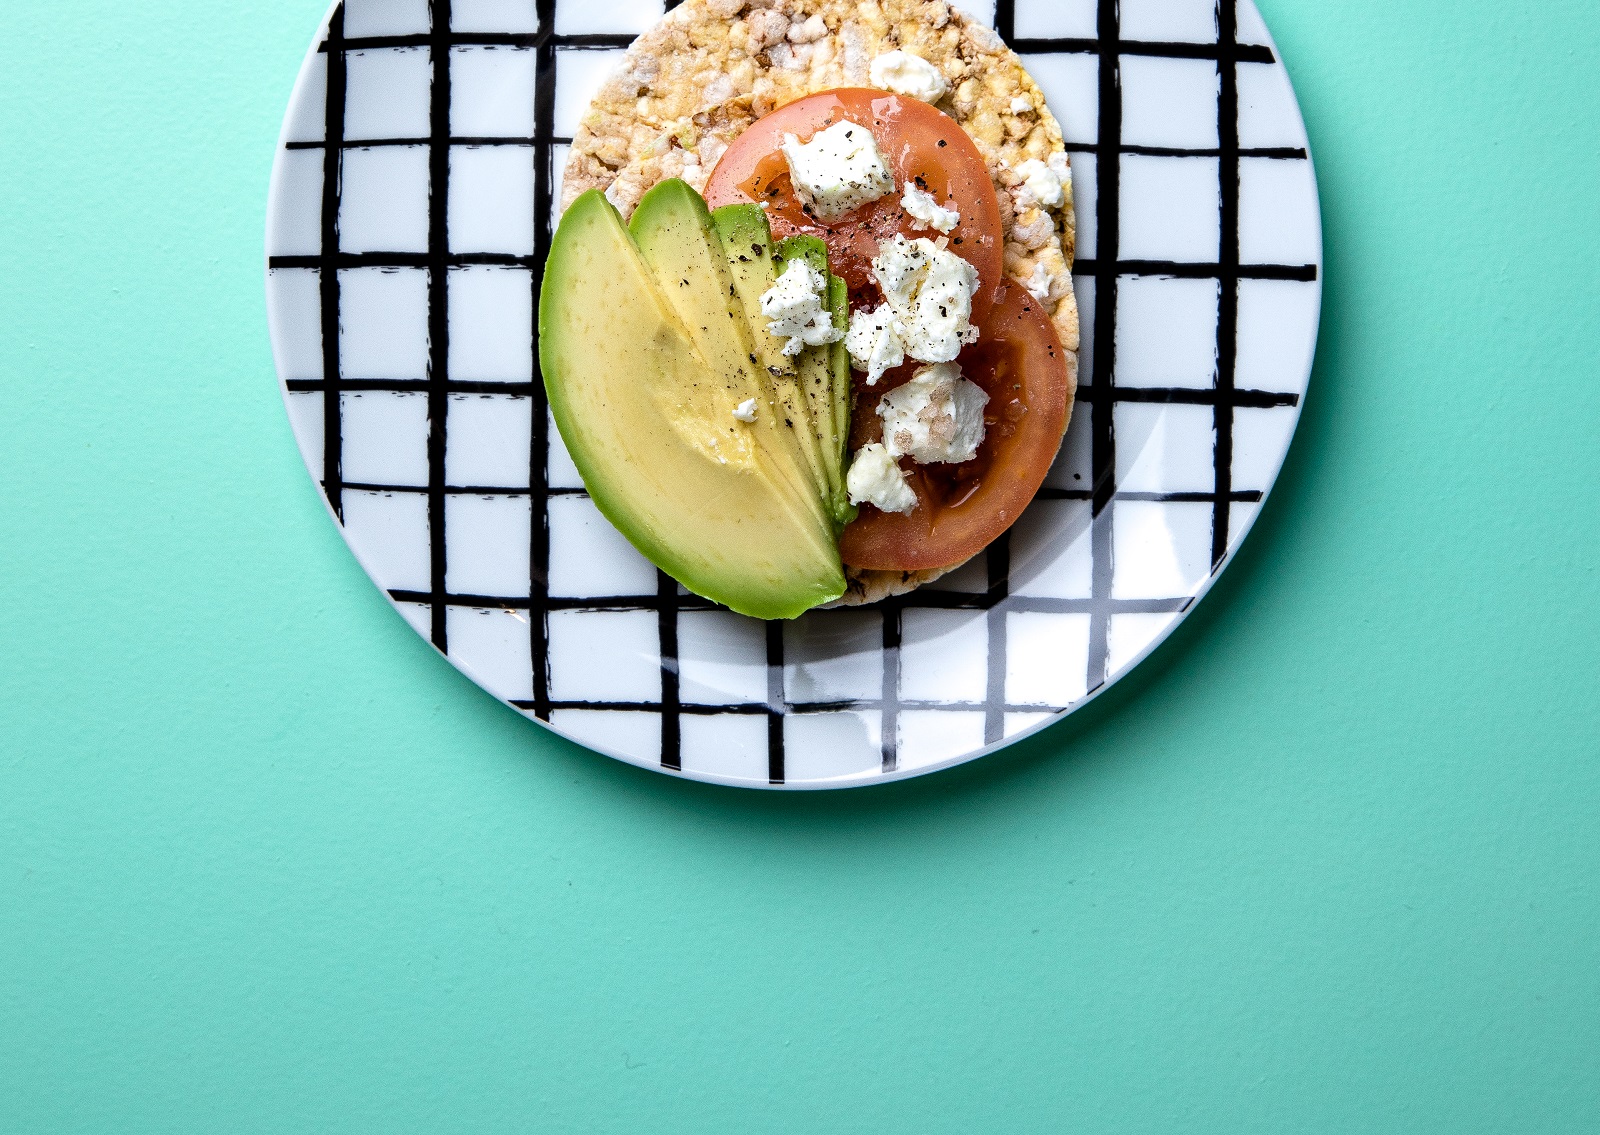 Tomato, Avocado & Feta on CORN THINS slices for lunch